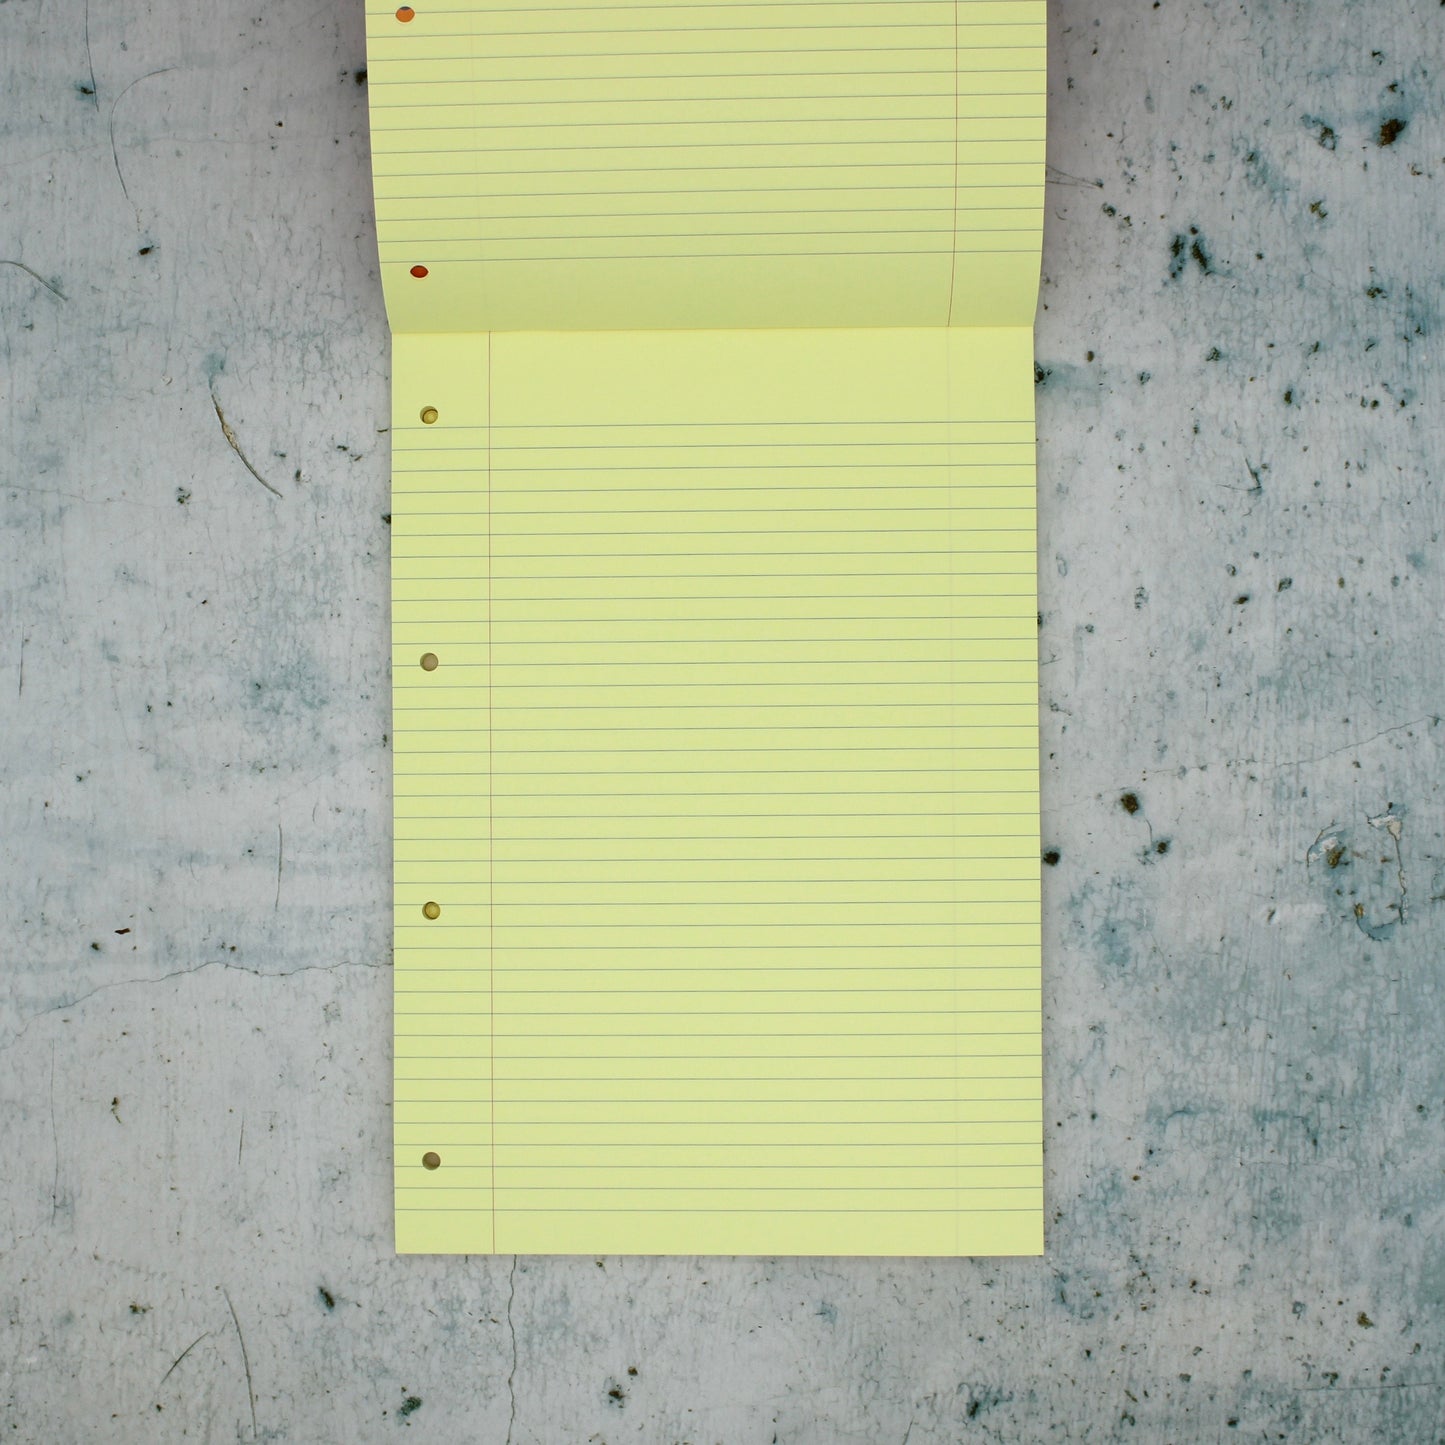 Rhodia A4 notepad - yellow pages